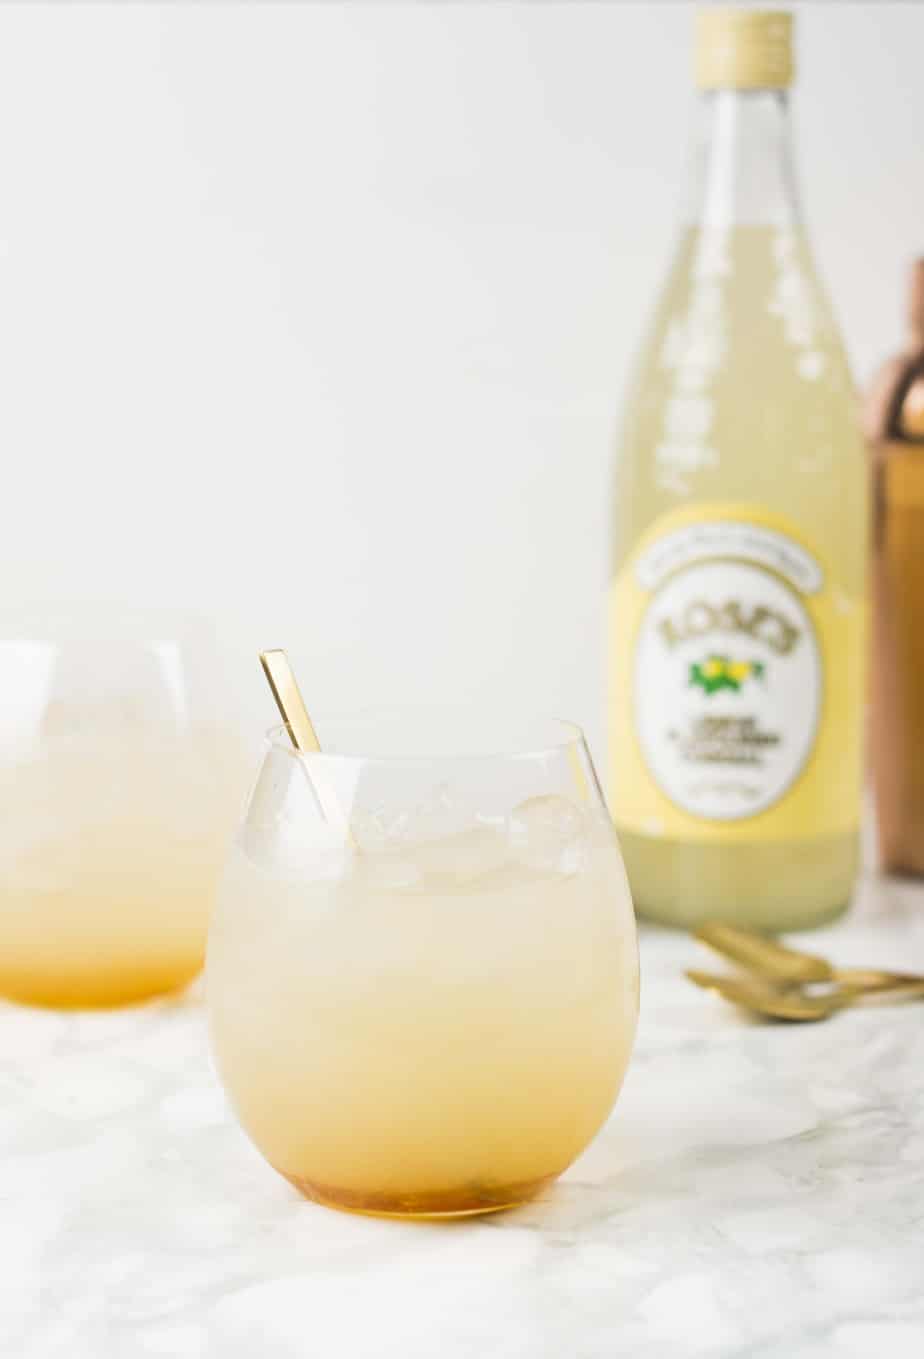 Lemon and Honey Gin & Tonic made with Roses Lemon Cordial - an easy drink that is perfect for summer and bursting with flavour